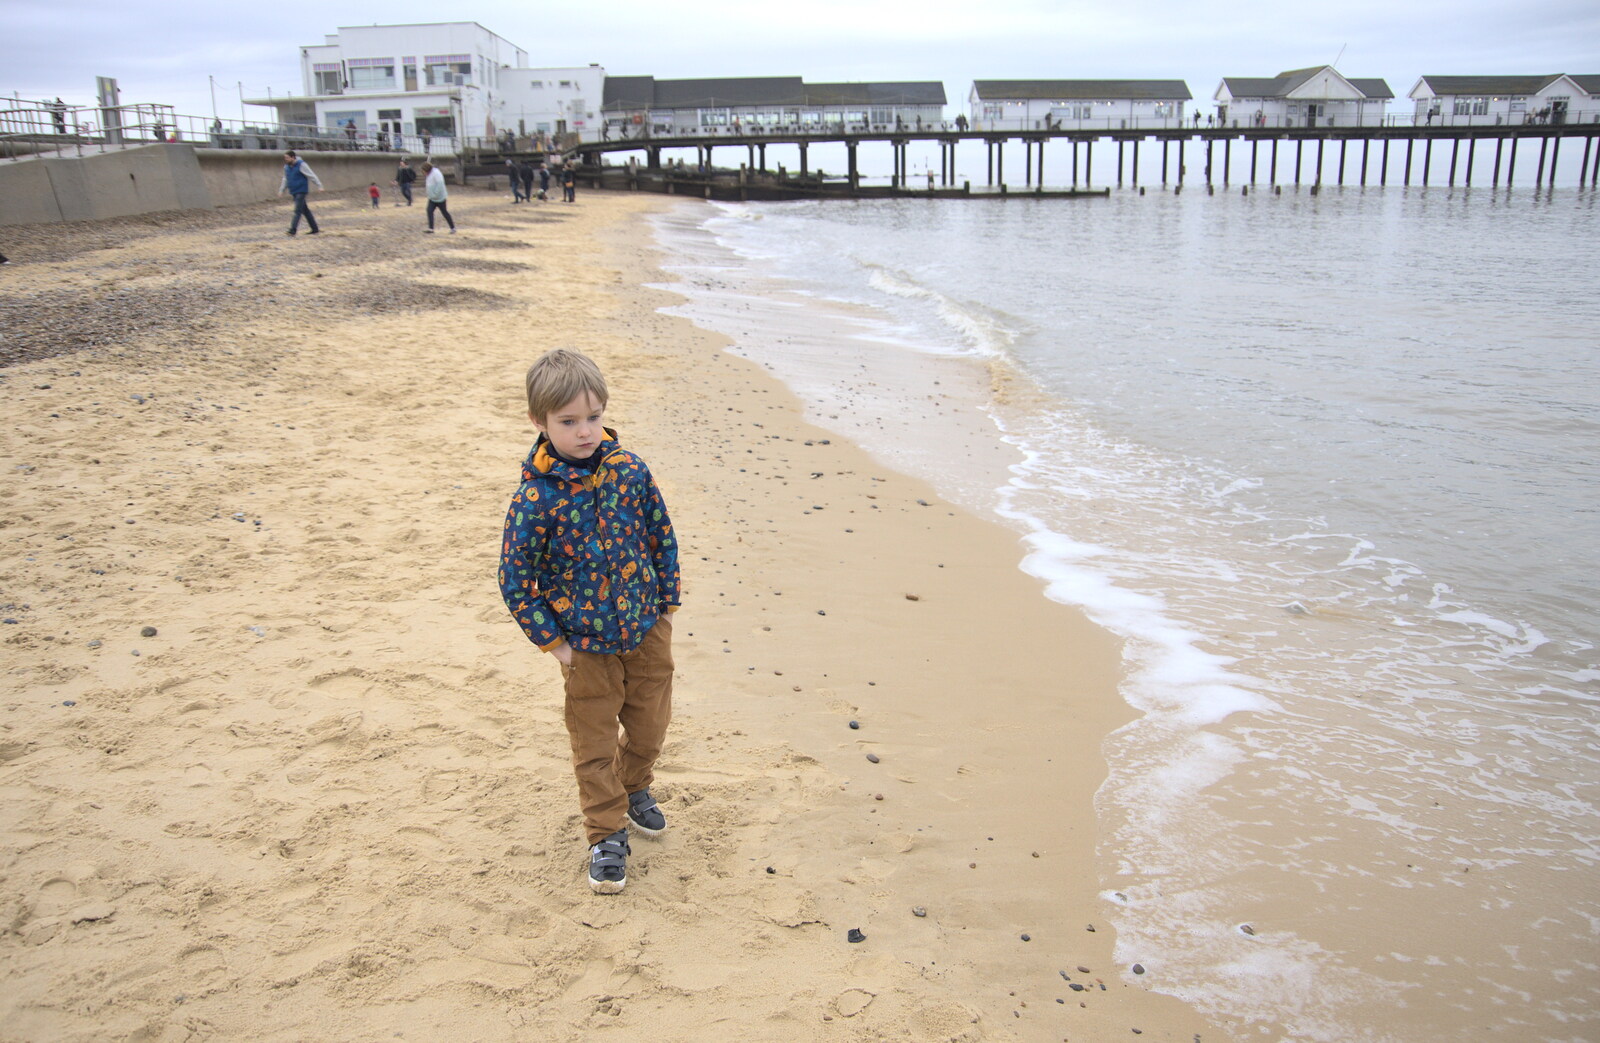 Harry looks 'meh' on the beach from A Southwold Car Picnic, Southwold, Suffolk - 11th March 2018